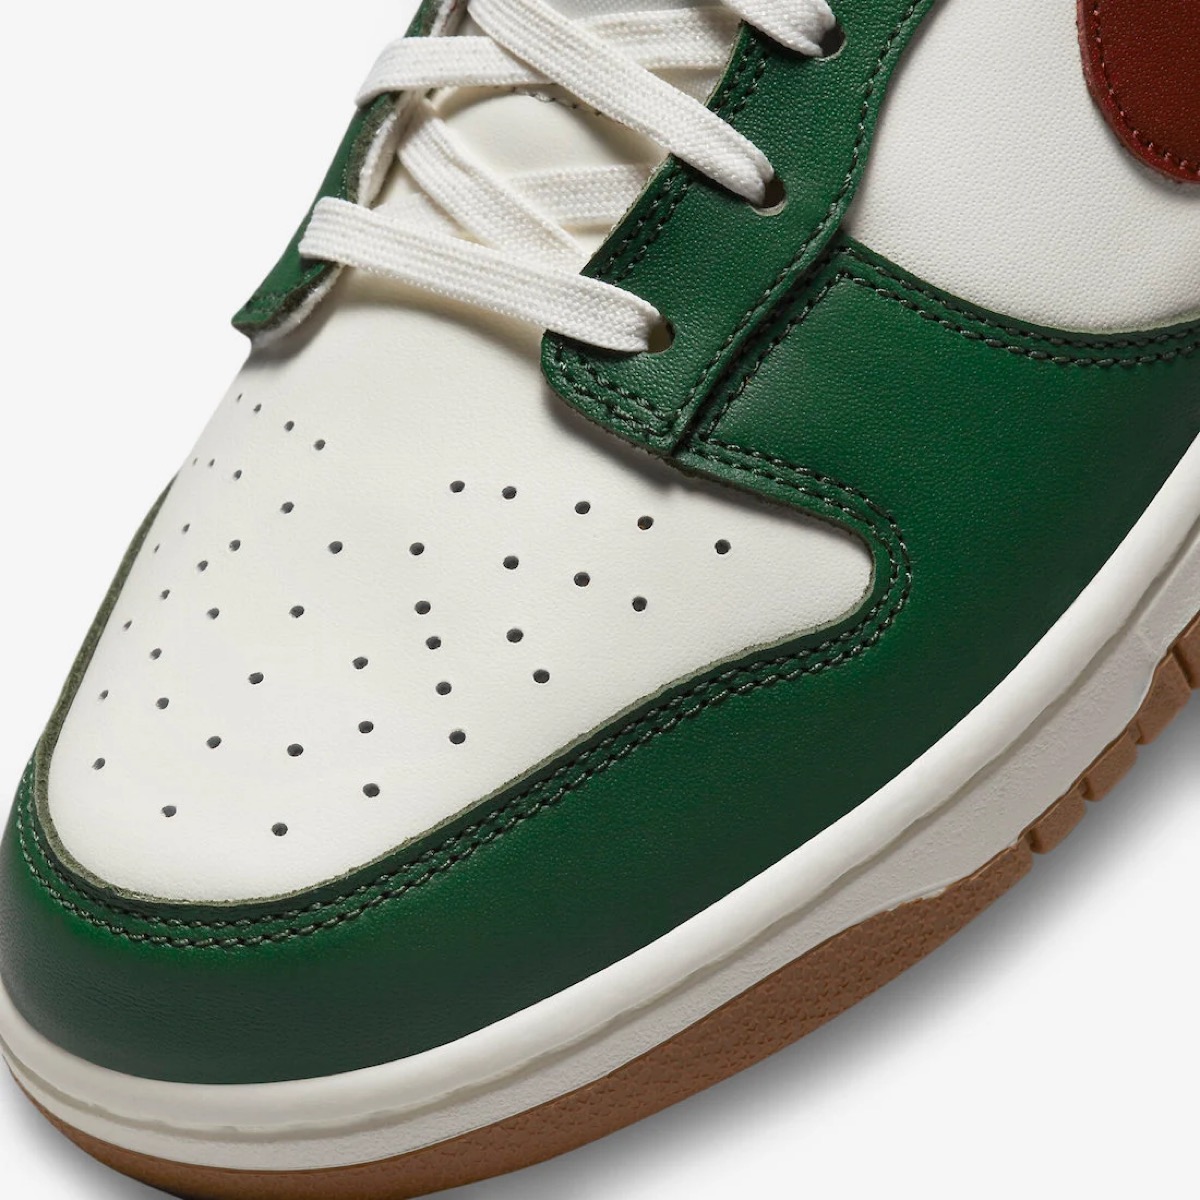 Nike Dunk Low “Gorge Green/Team Red”が10月1日より発売予定 | UP TO DATE